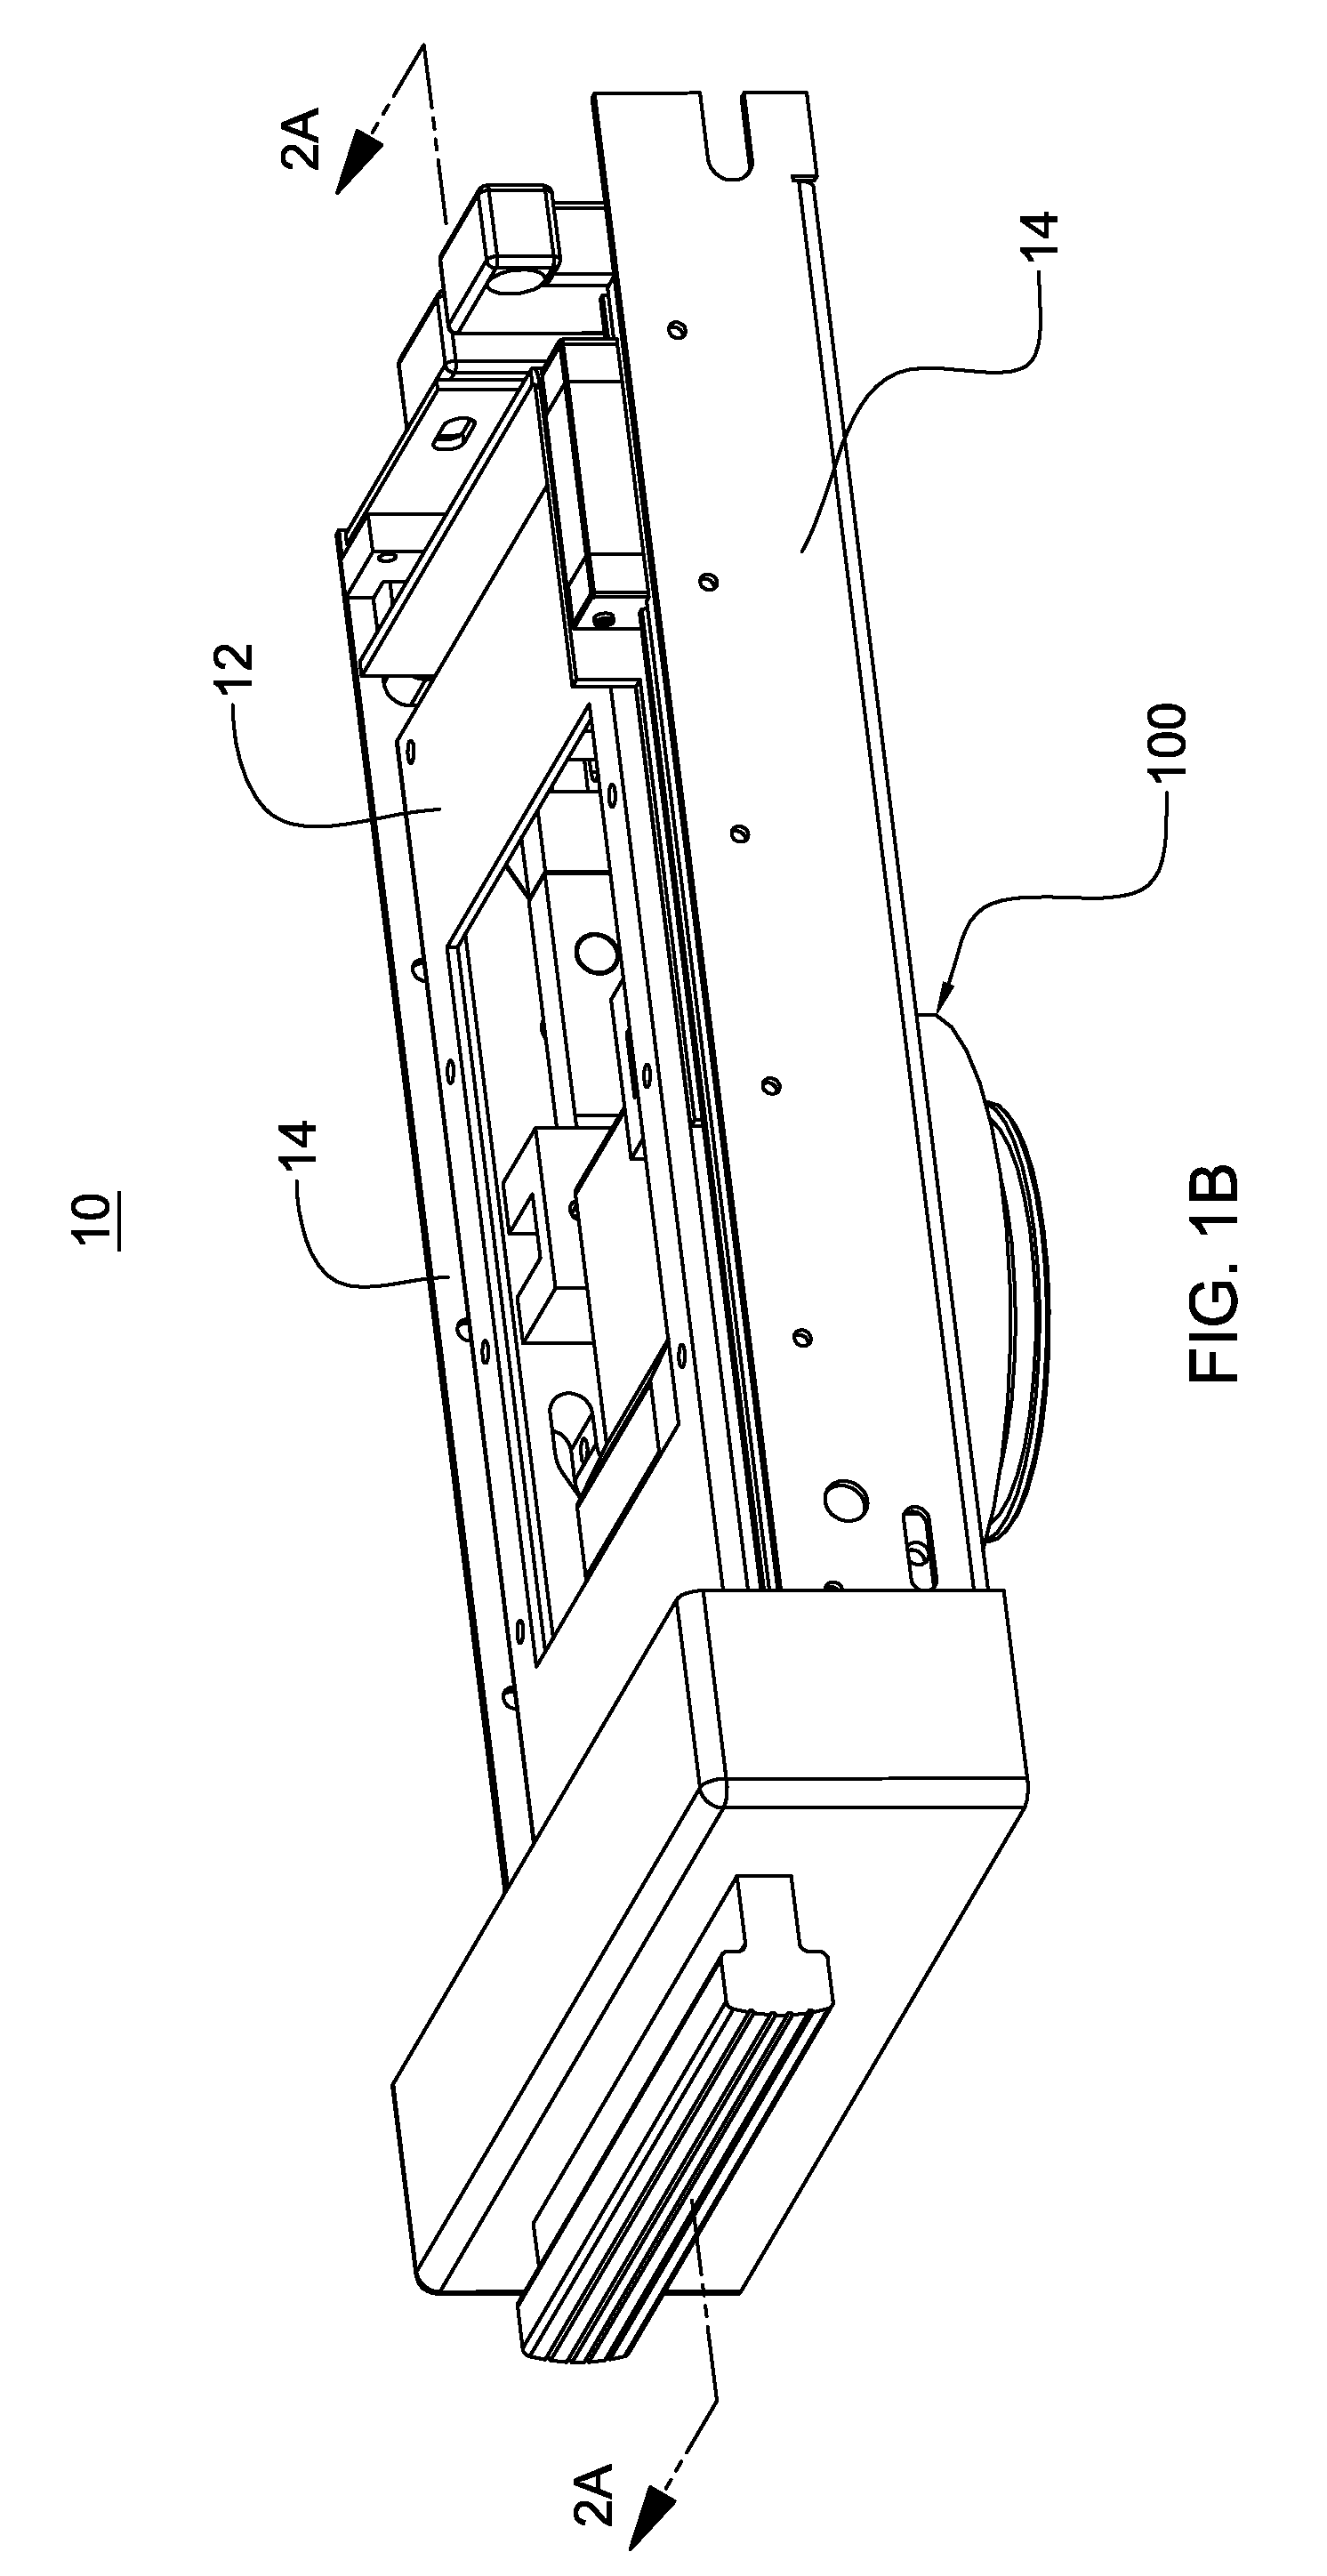 Sliding sample cell insertion and removal apparatus for x-ray analyzer